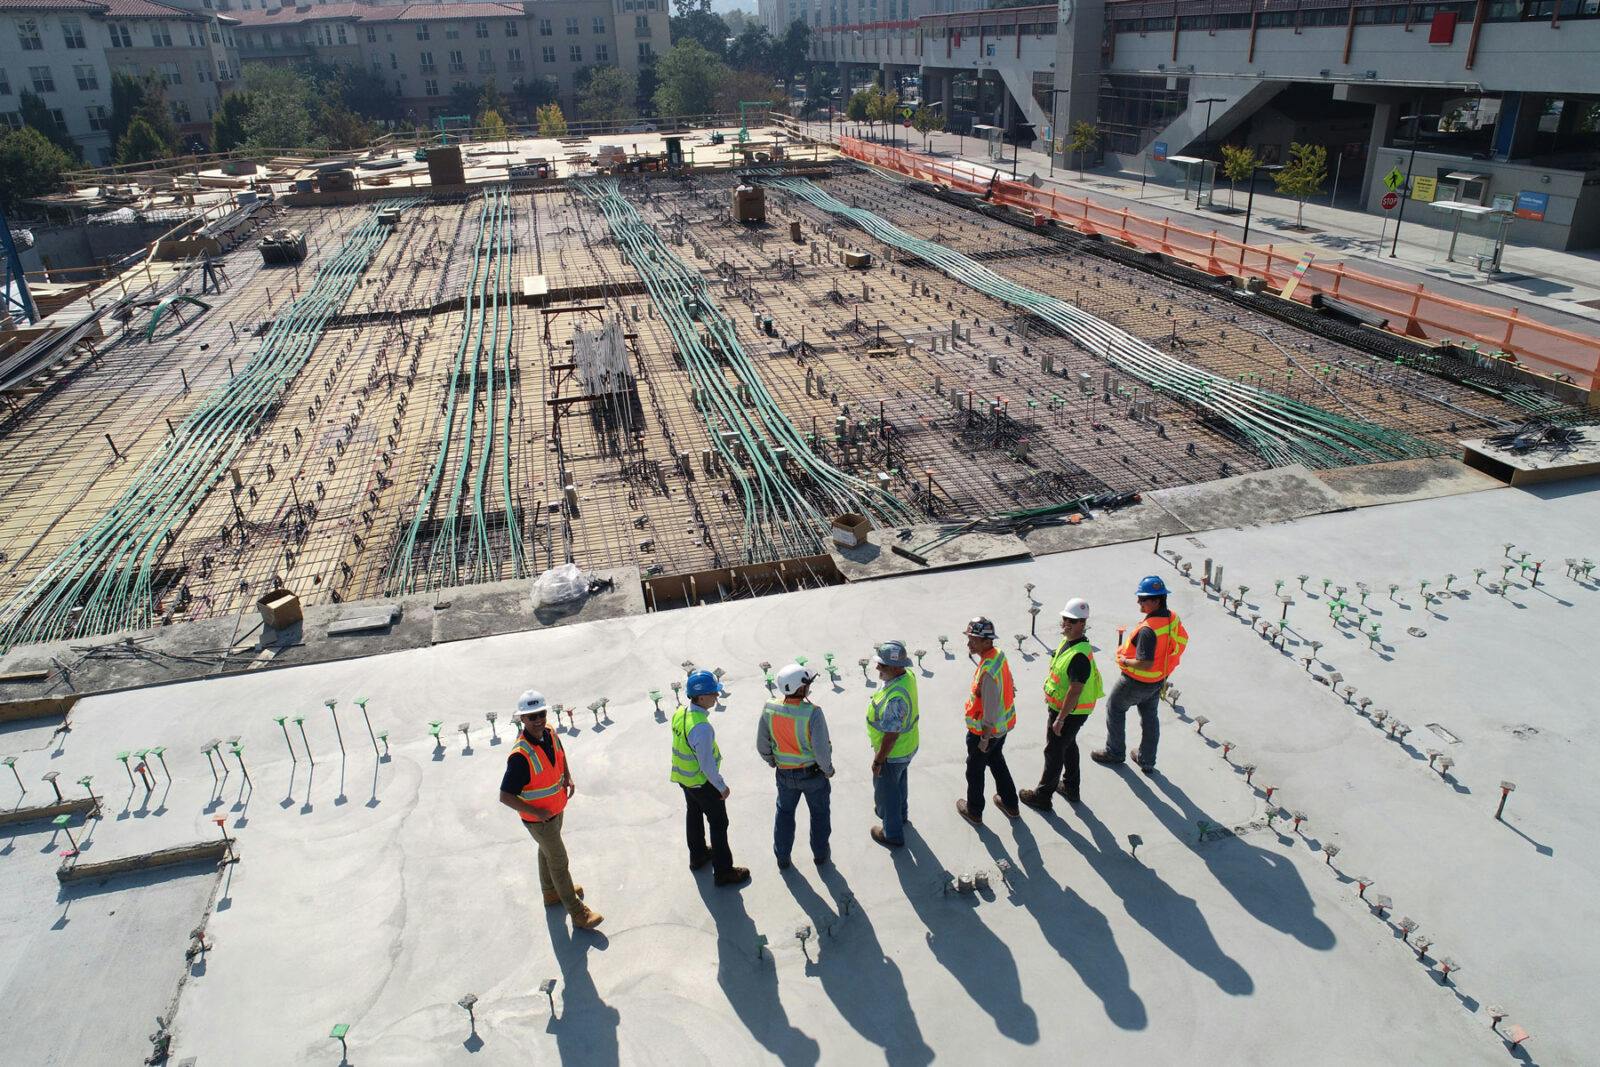 A group of construction workers standing on top of a construction site. The workers are wearing hard hats and safety vests, and they are looking down at the construction site.